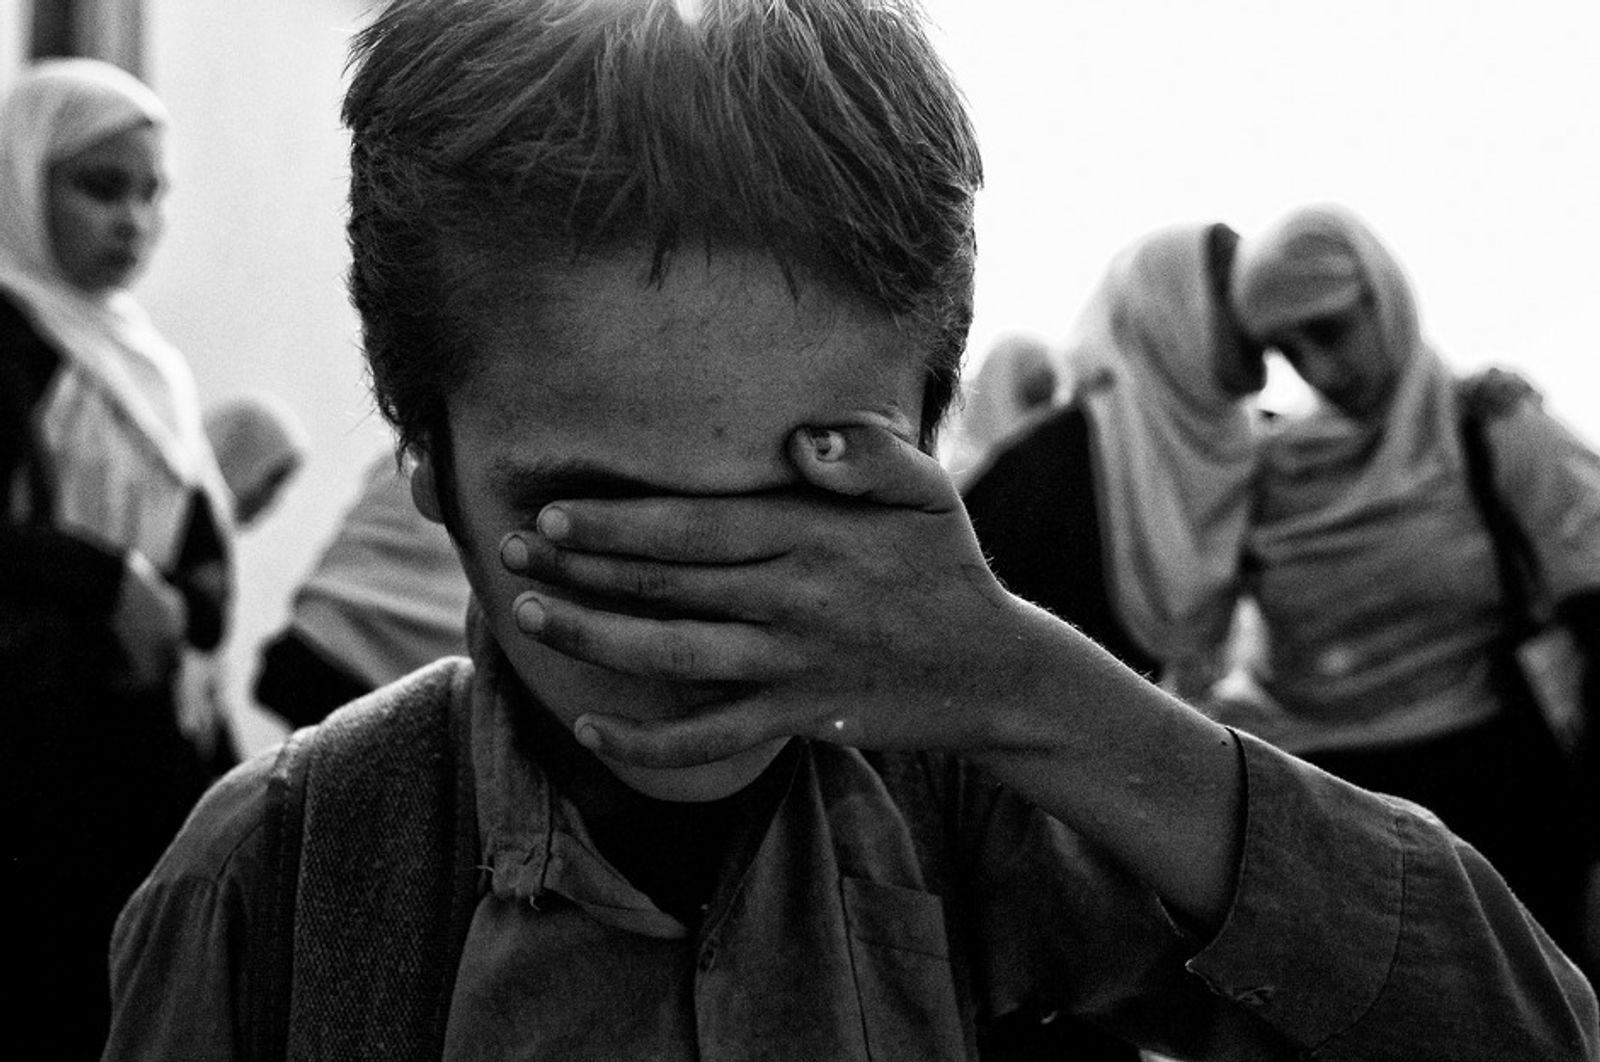 © Mateusz Jazwiecki - Image from the Kabul Blind School photography project